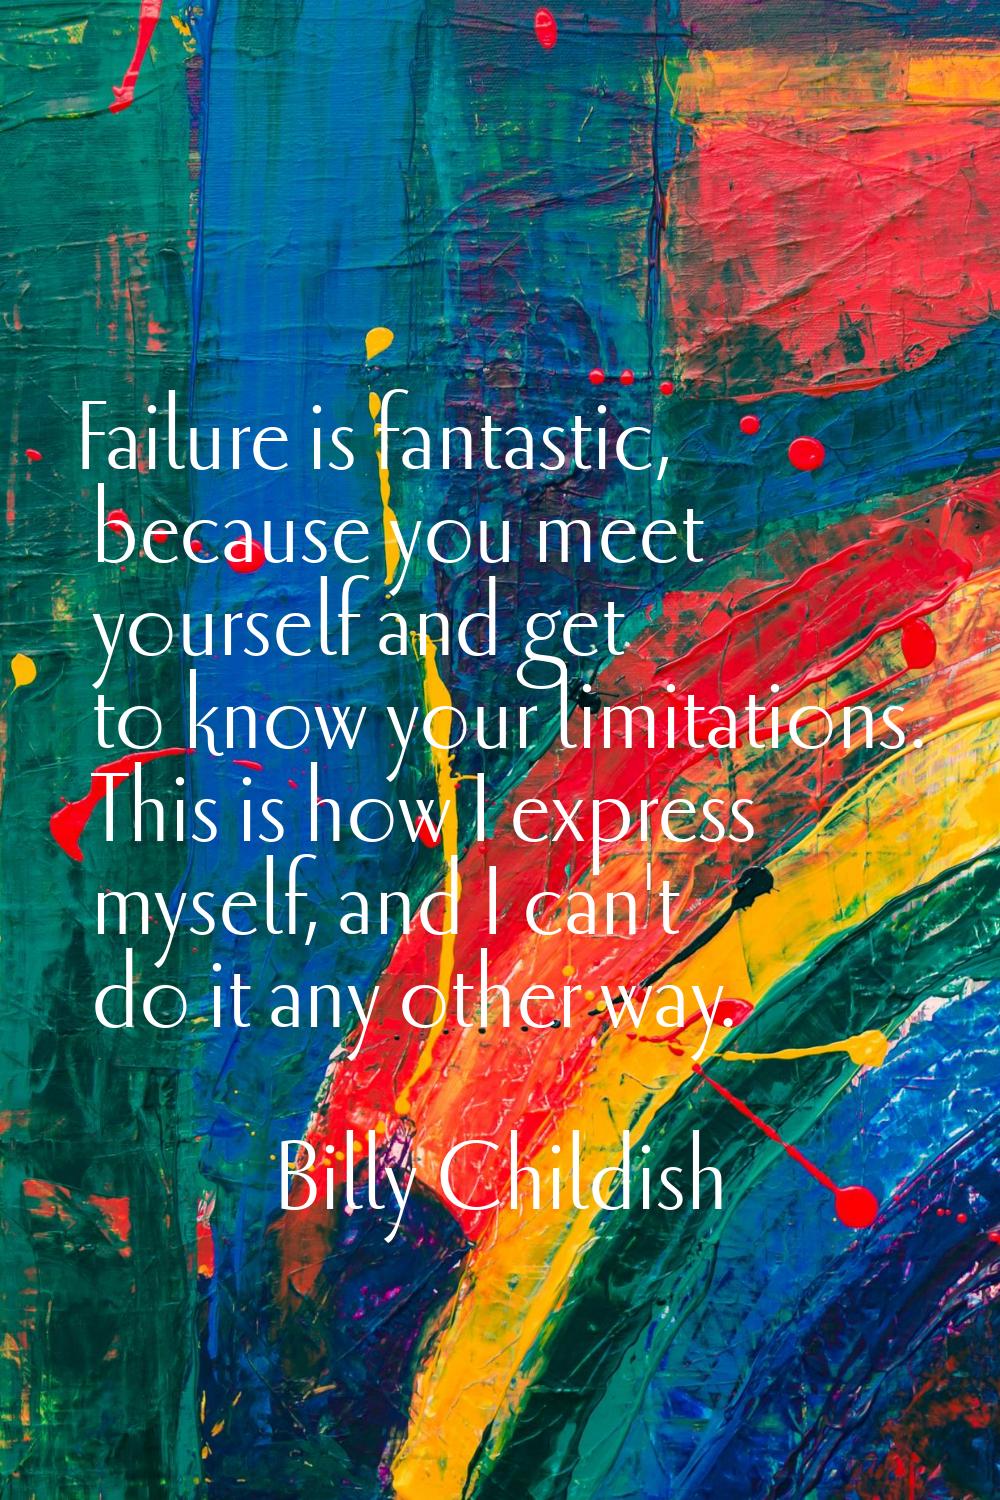 Failure is fantastic, because you meet yourself and get to know your limitations. This is how I exp